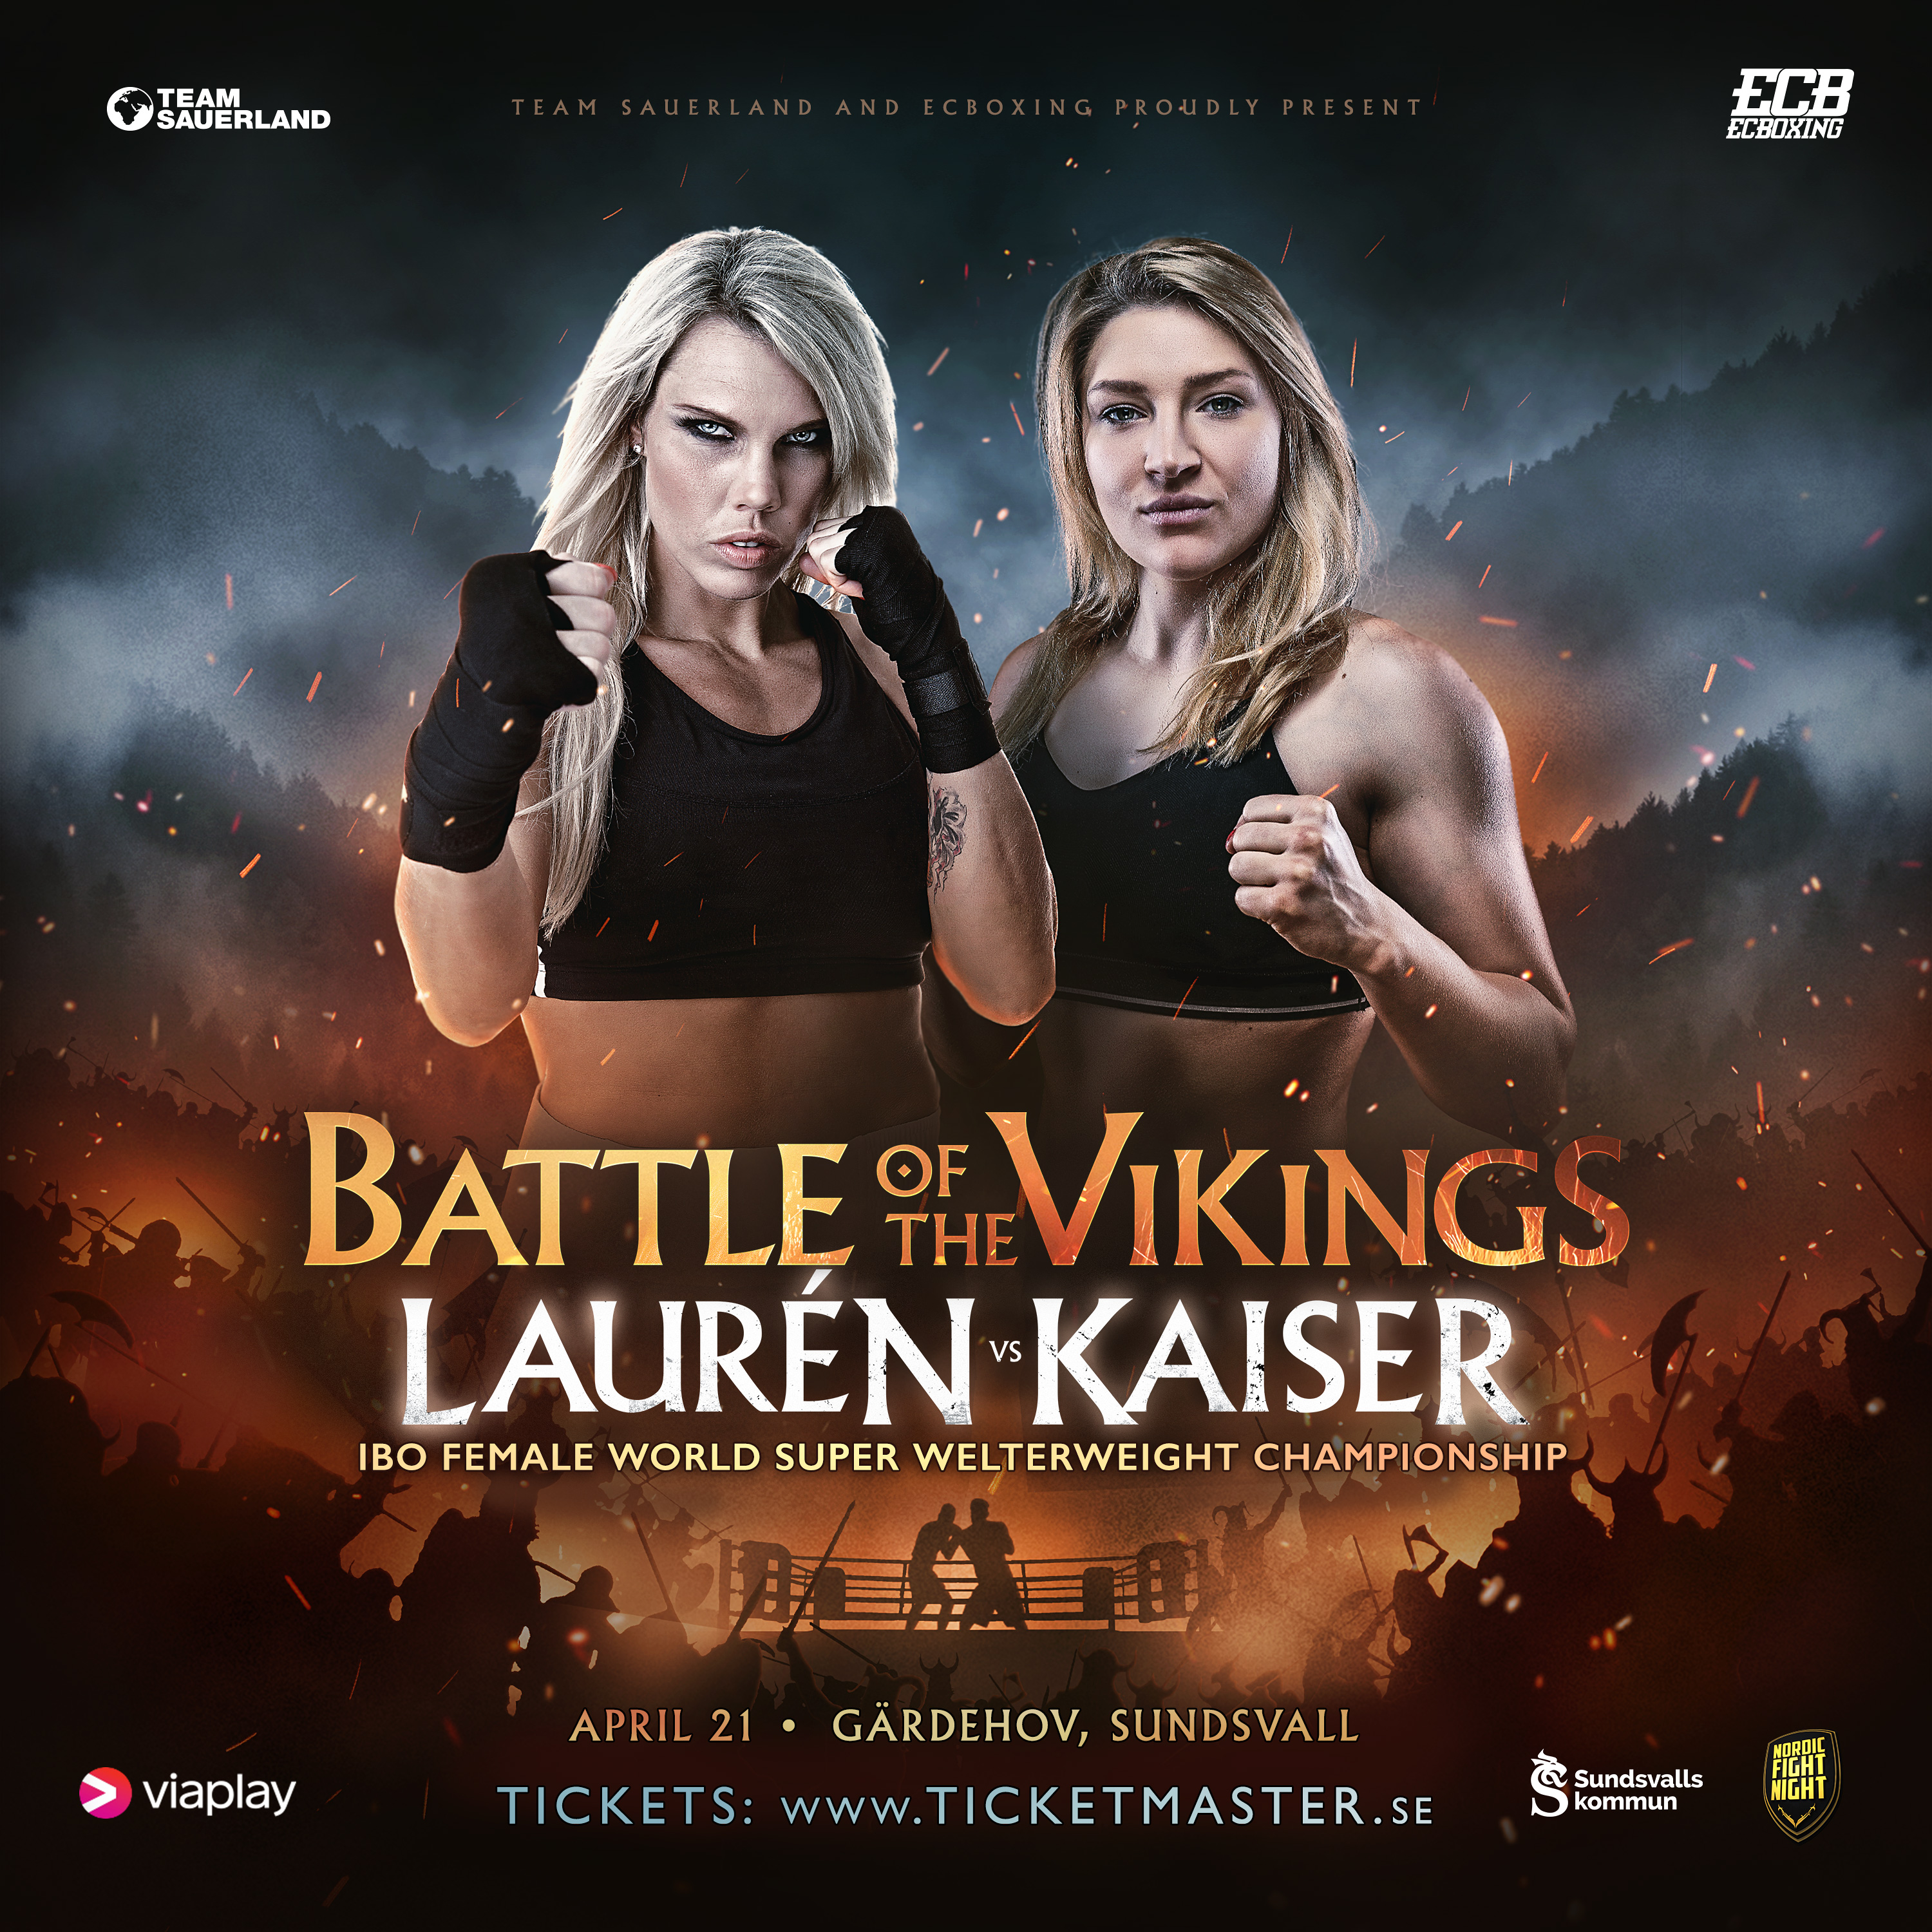 poster for the battle of the vikings heavyweight boxing fight in Sweden